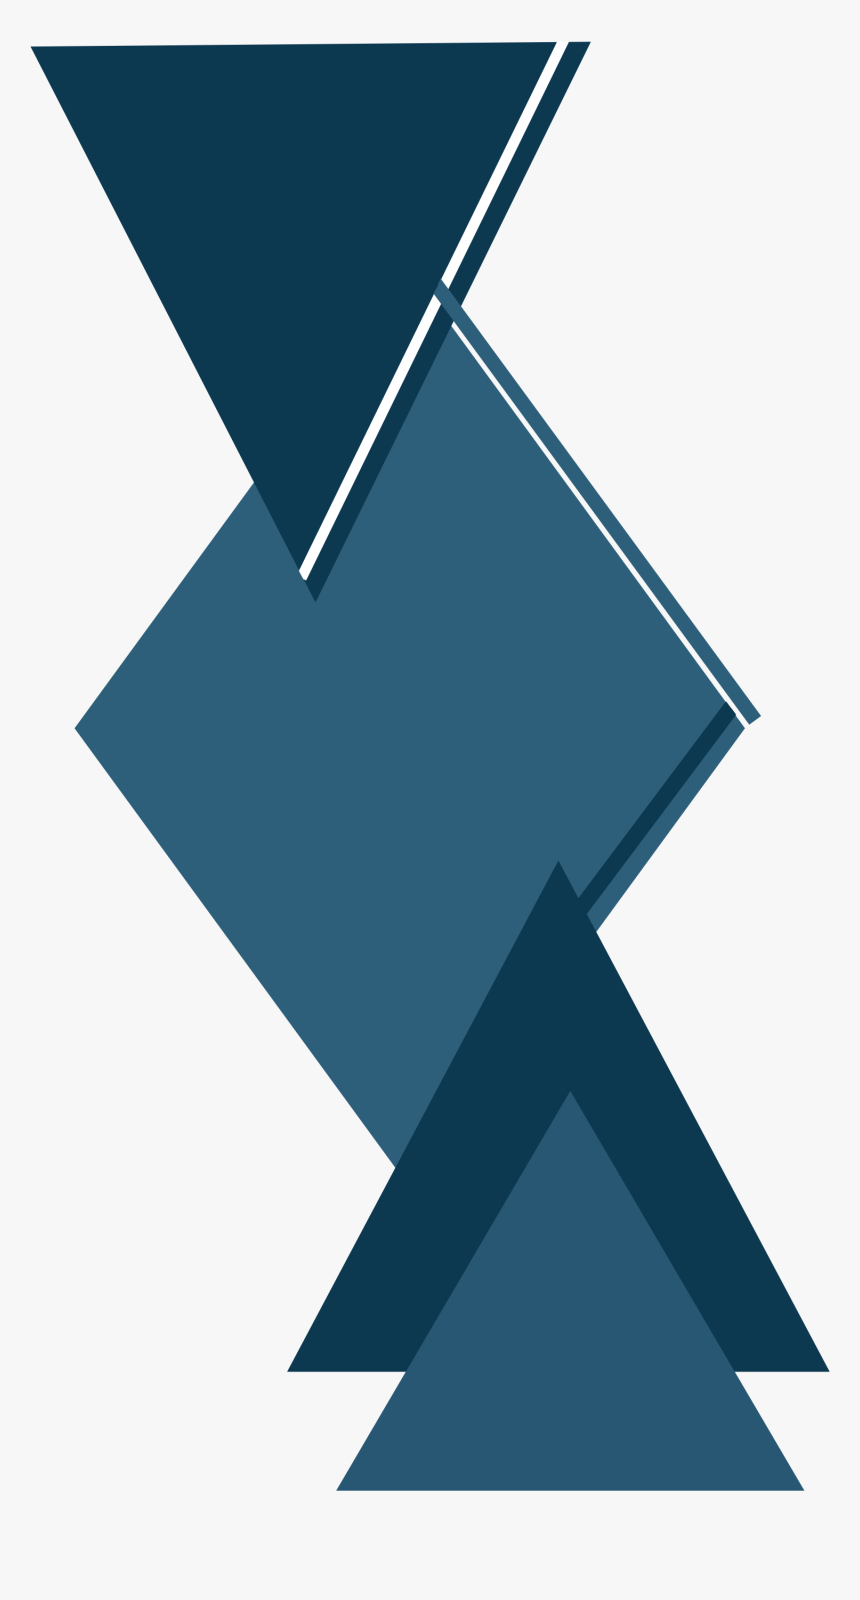 #triangle #blue #abstract #background #shape #frame - Graphic Design, HD Png Download, Free Download